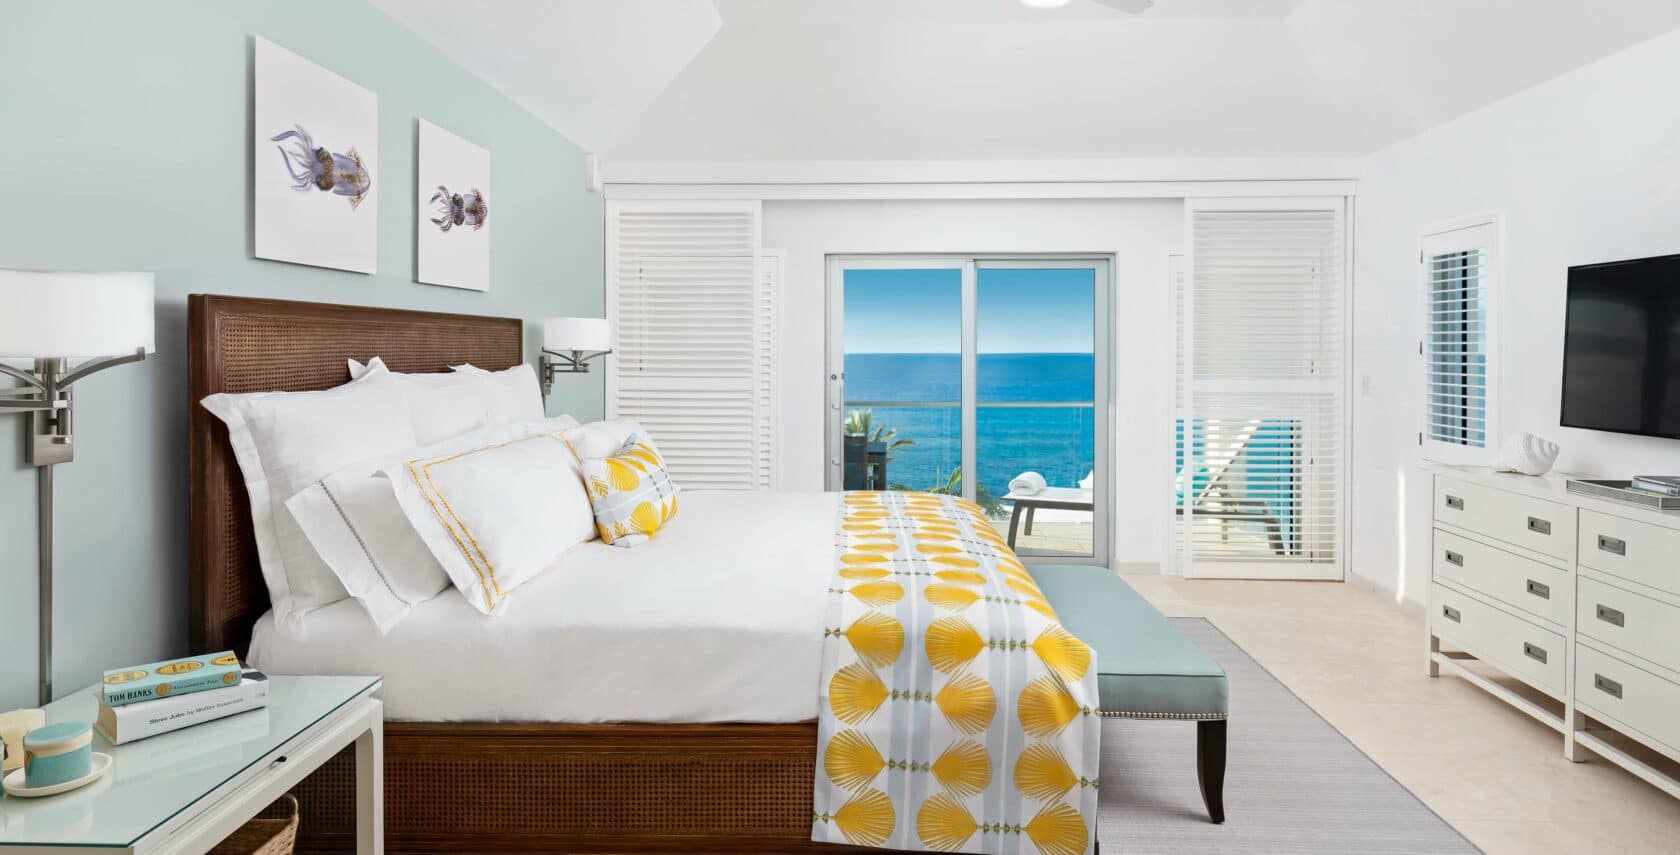 A bedroom with large glass doors showing a view of the ocean.